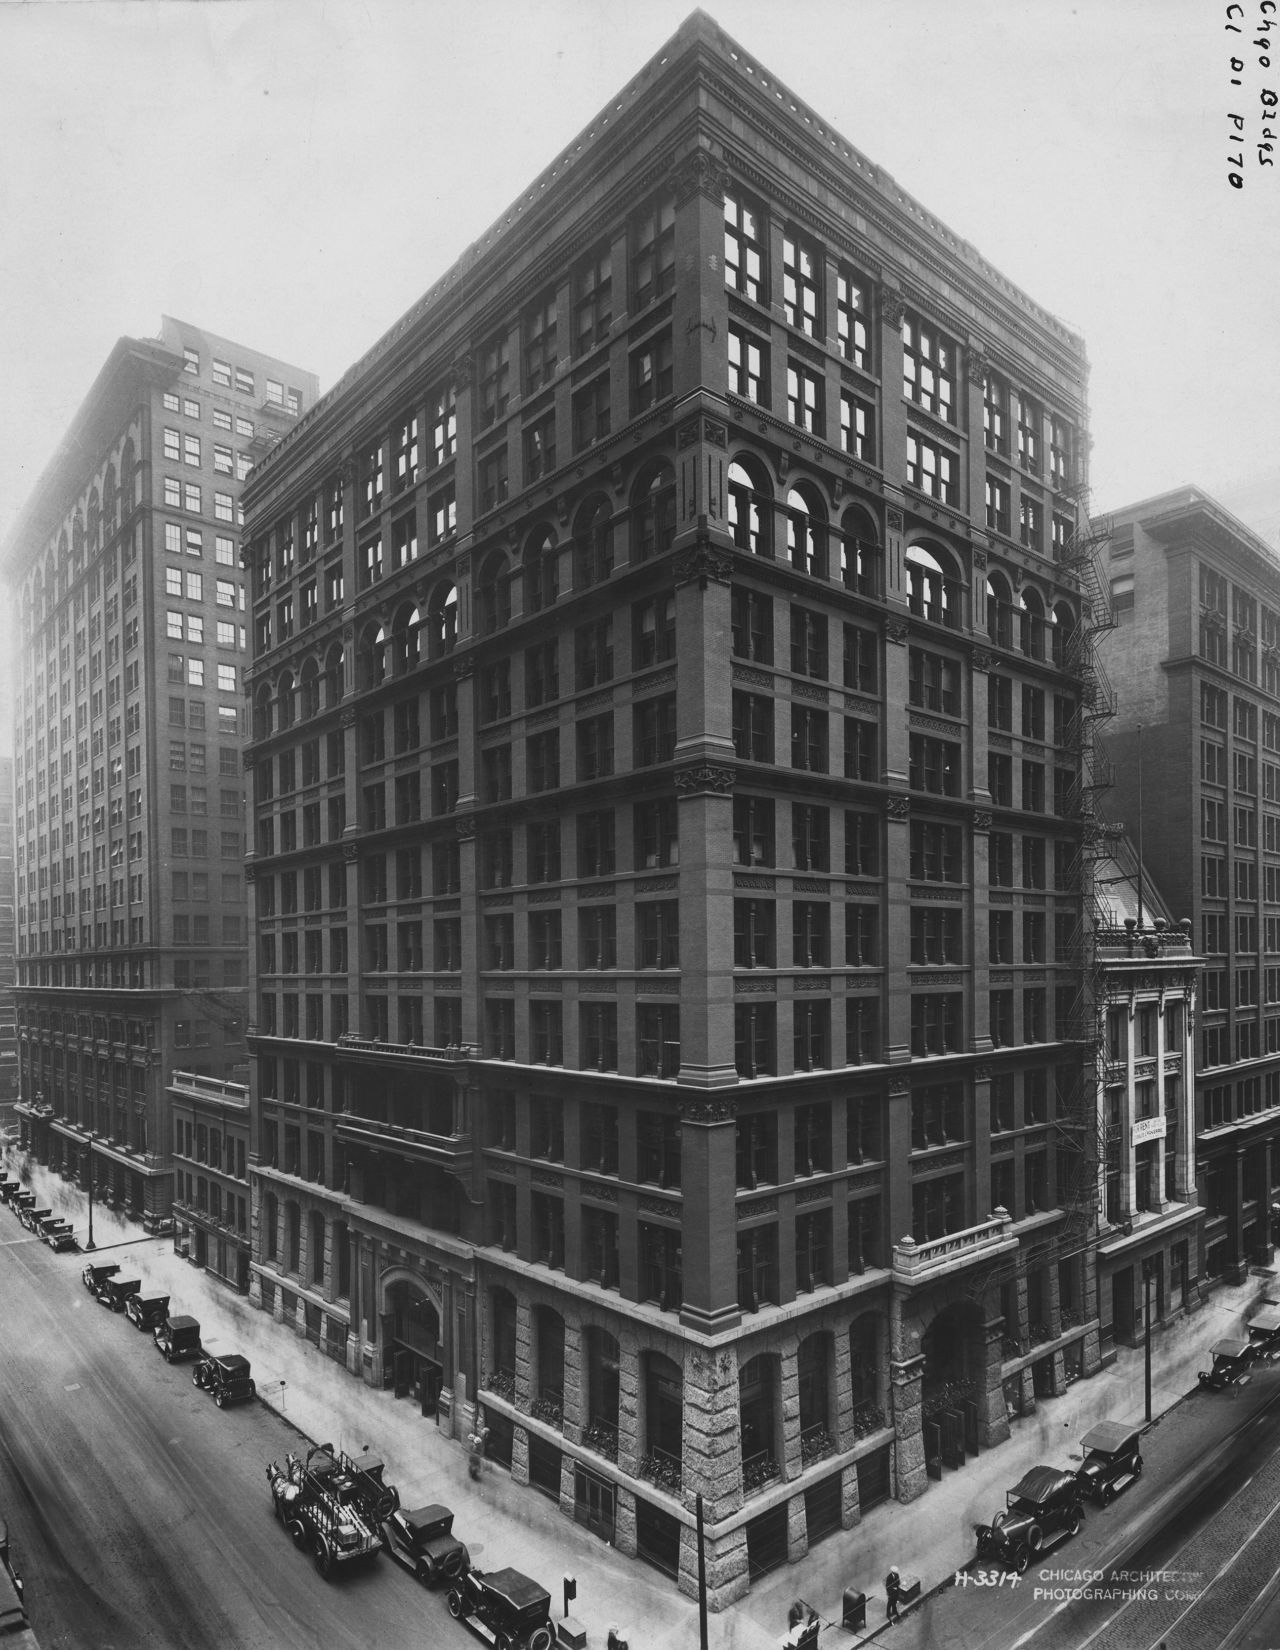 Exterior of the Home Insurance Building, Chicago. The building was demolished in 1931.